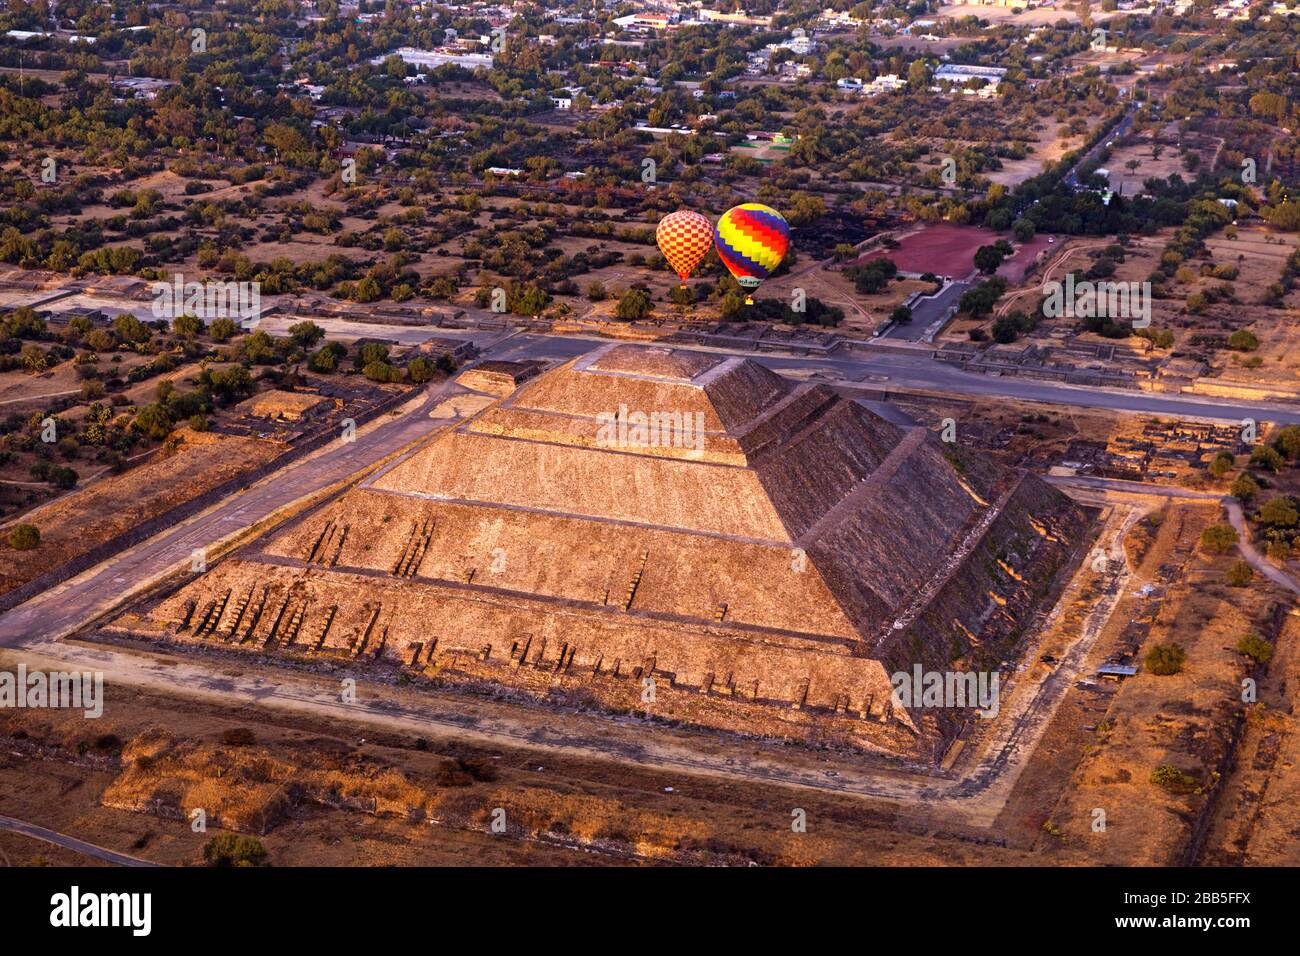 Mexico, Mexico City, Teotihuacán archaeological zone, Mexico's largest pre-Hispanic empire. Hot air balloons at sunrise over the Pyrámide del Sol Stock Photo